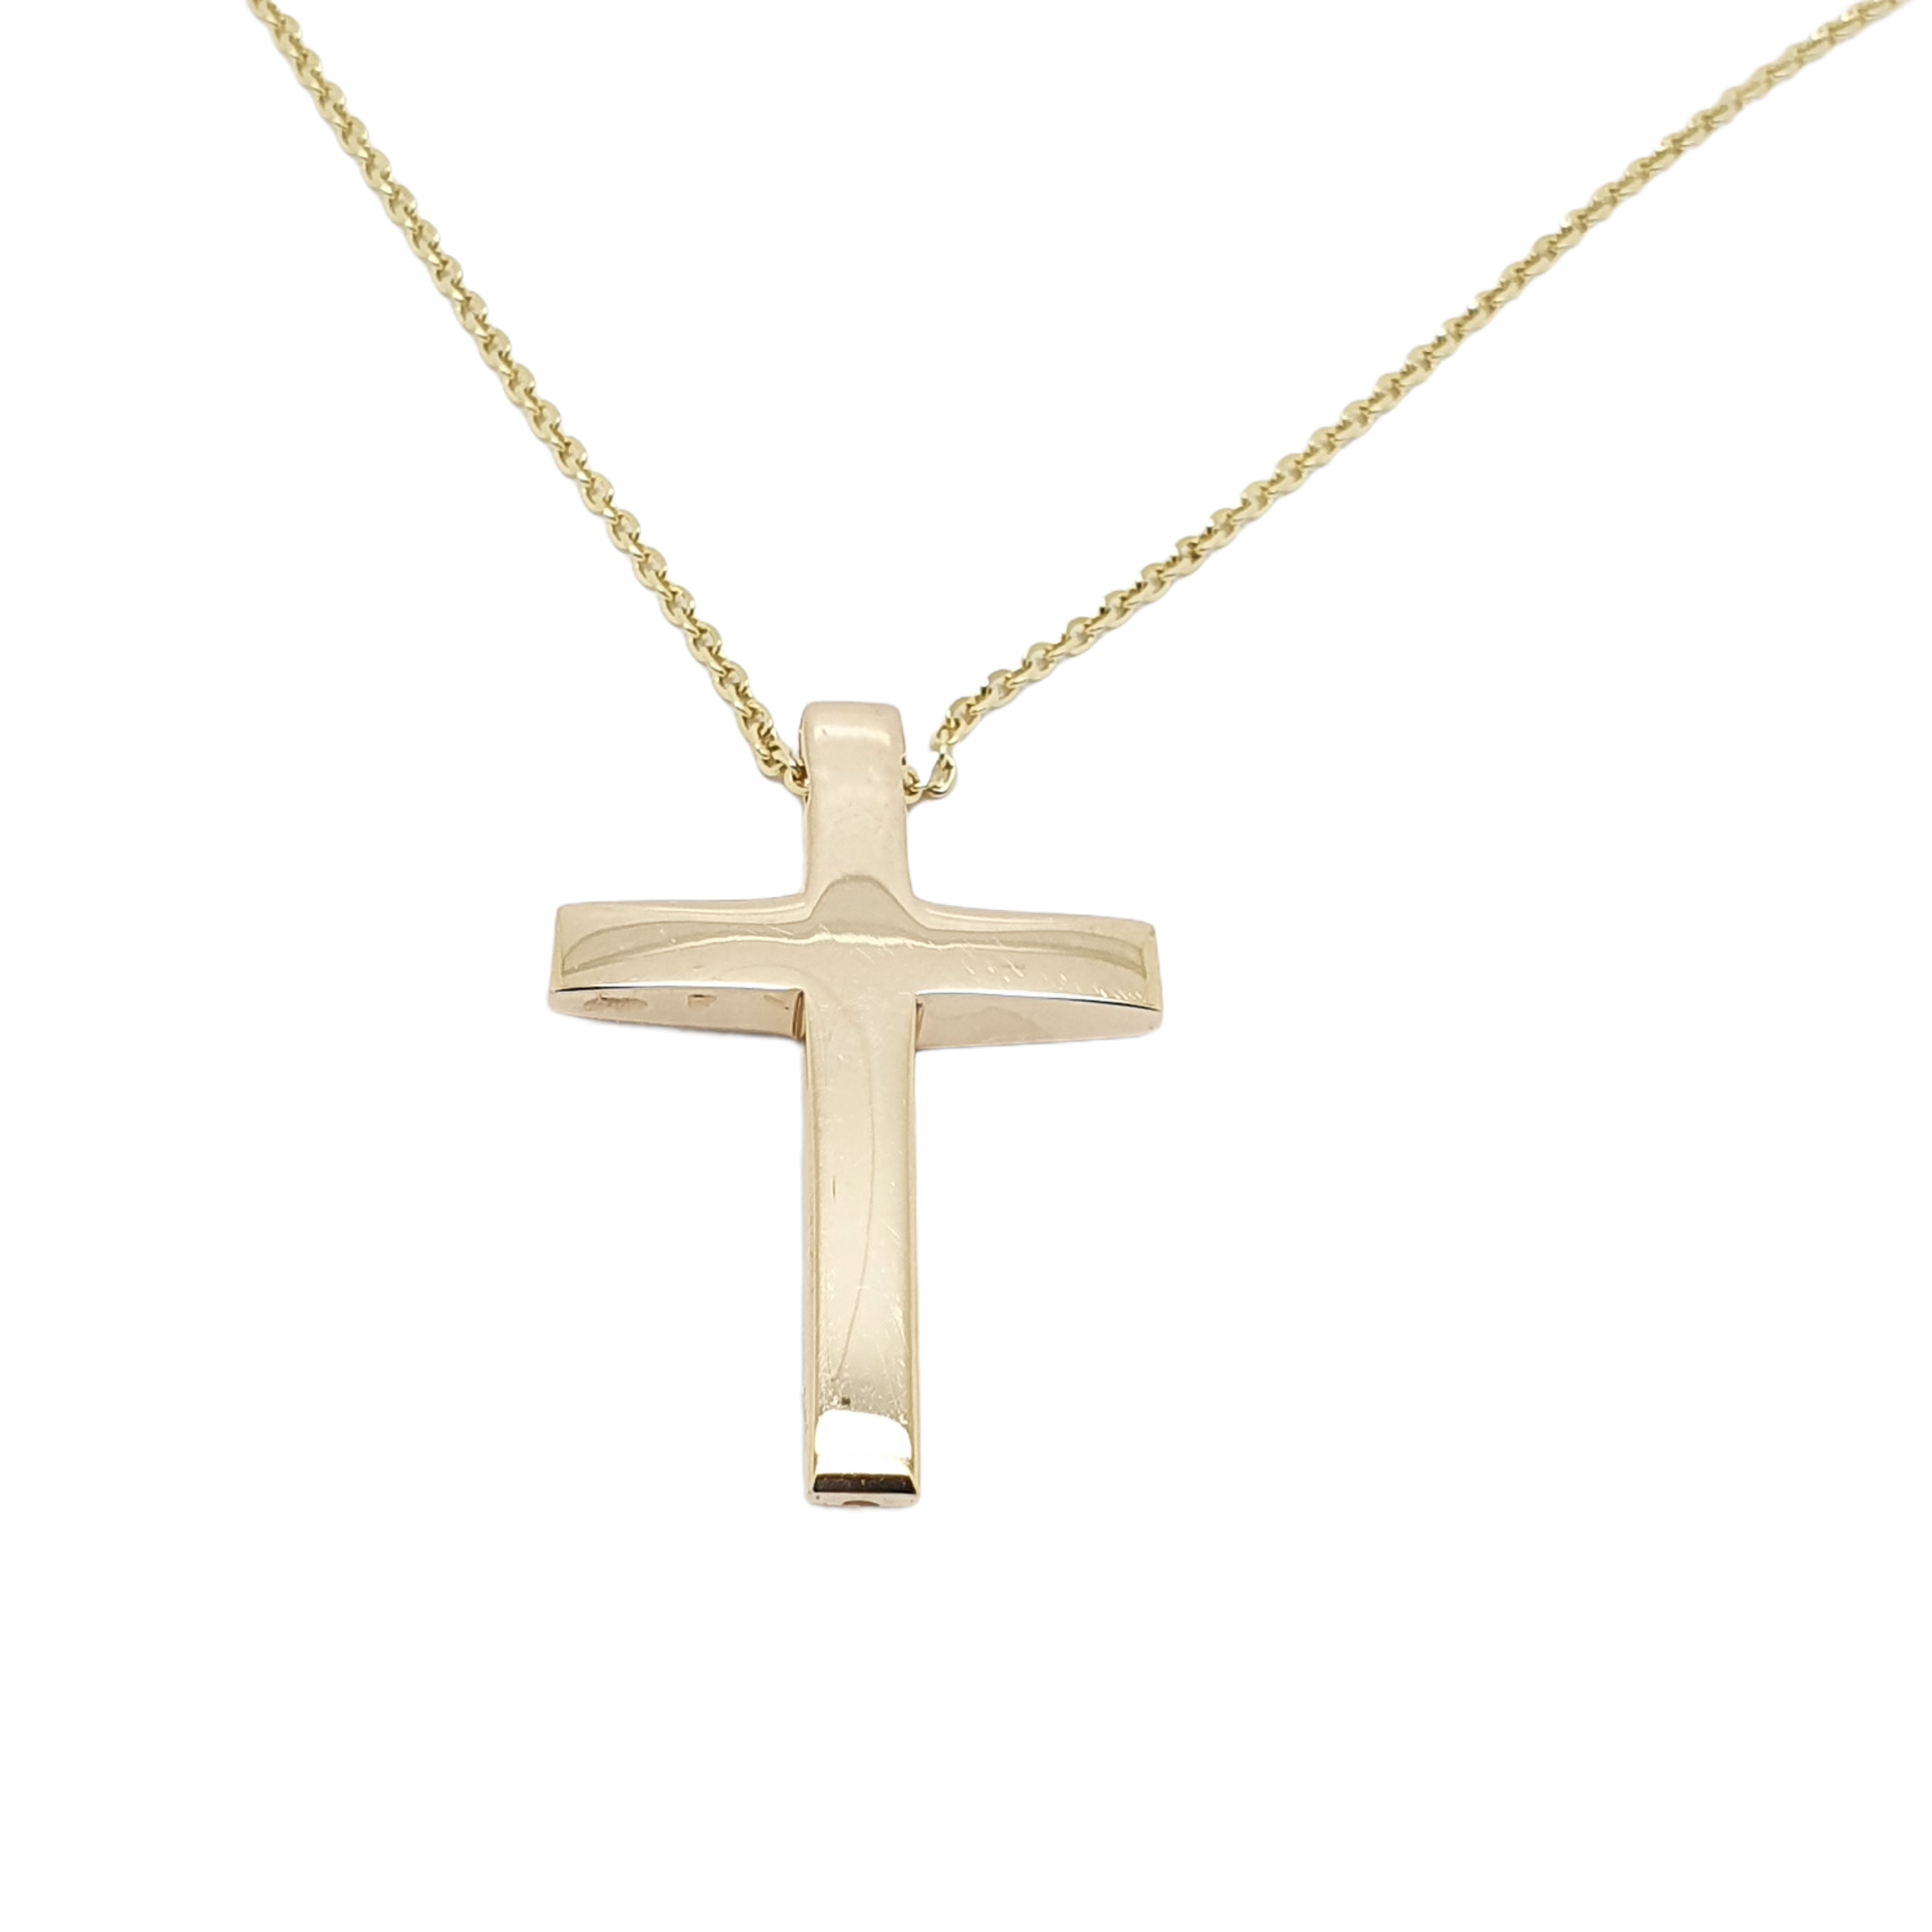 Golden double sided cross (with chain) k14 (code 2042)